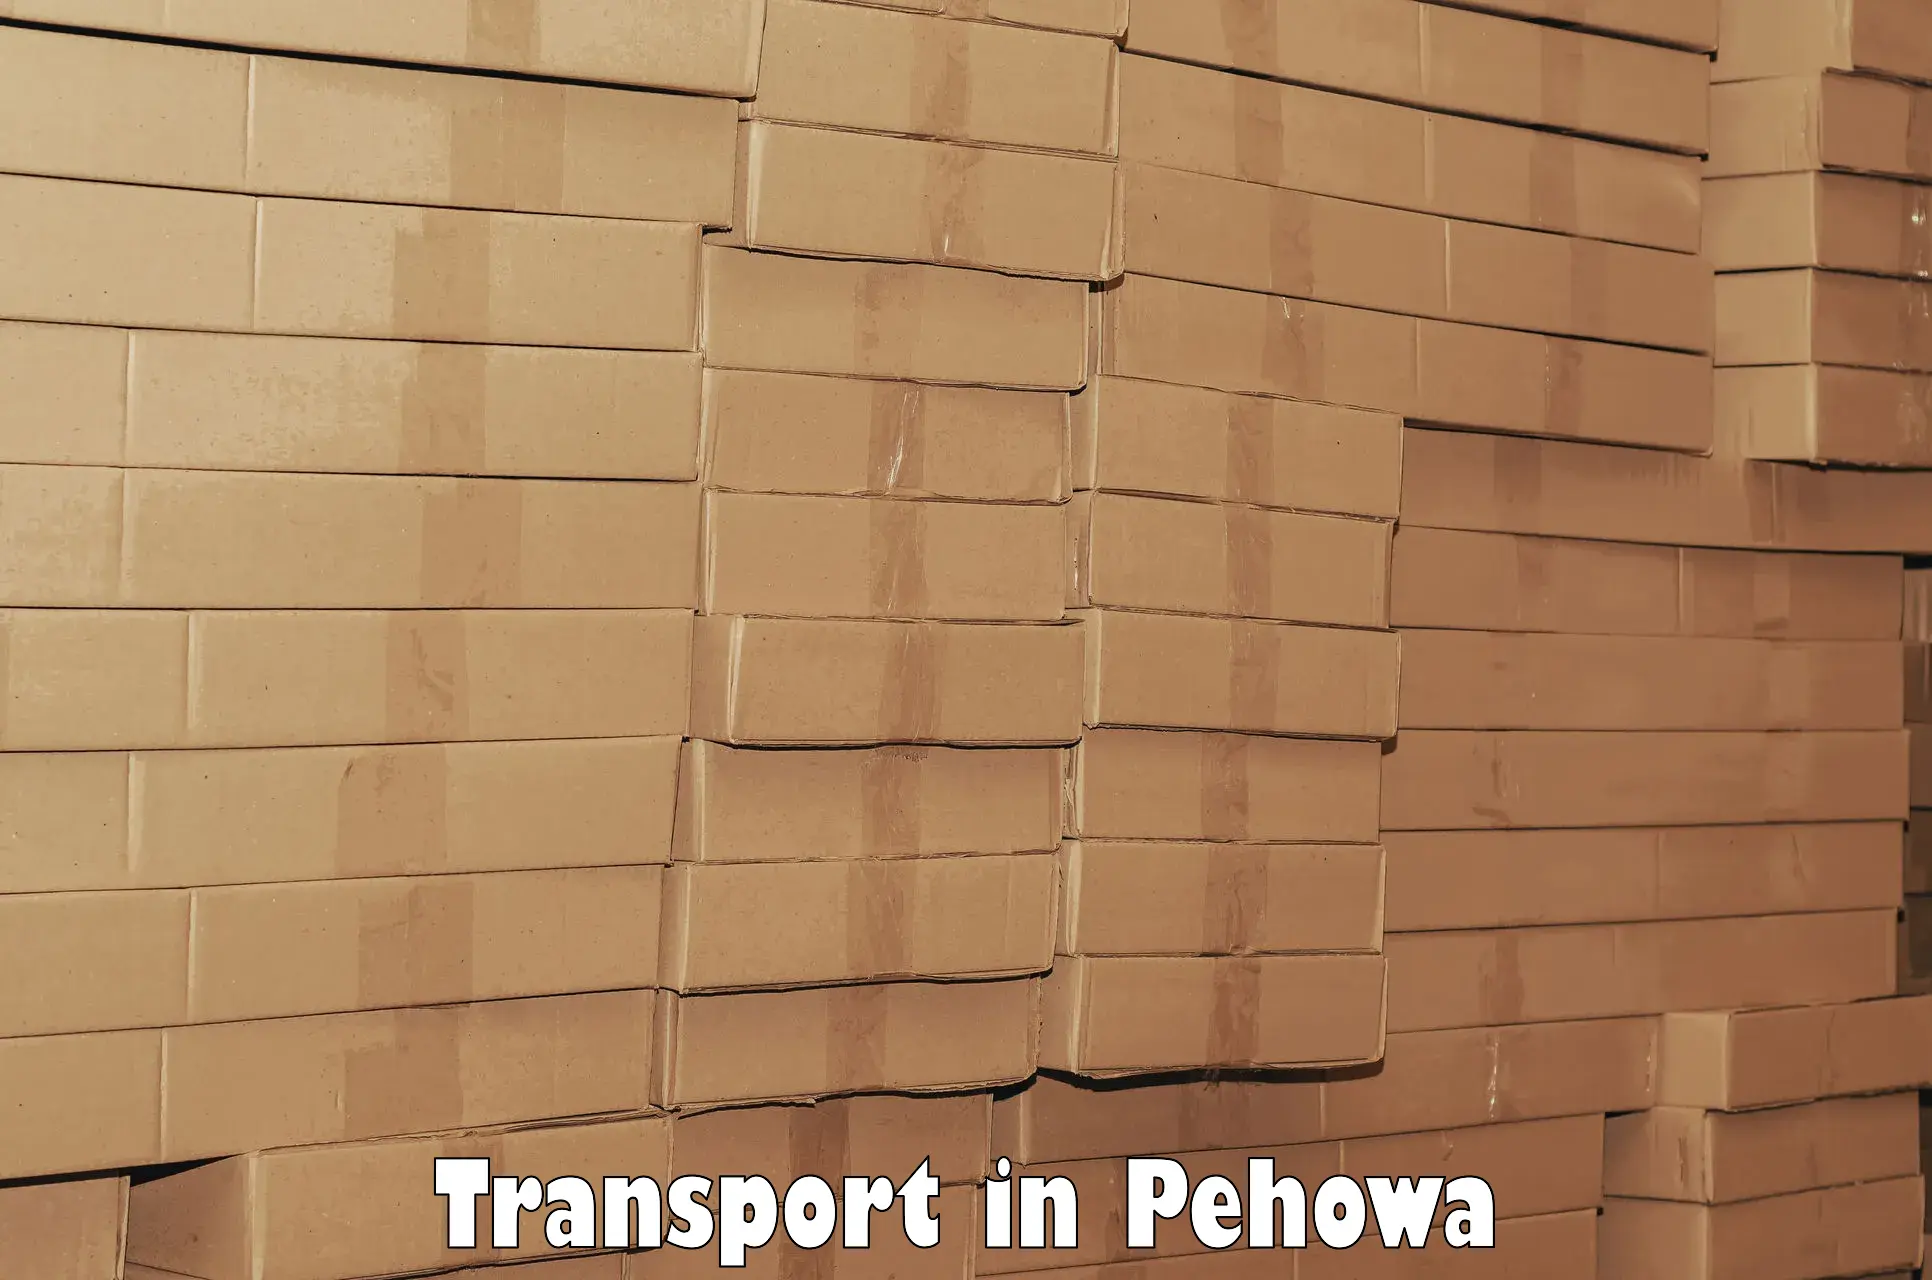 Container transportation services in Pehowa